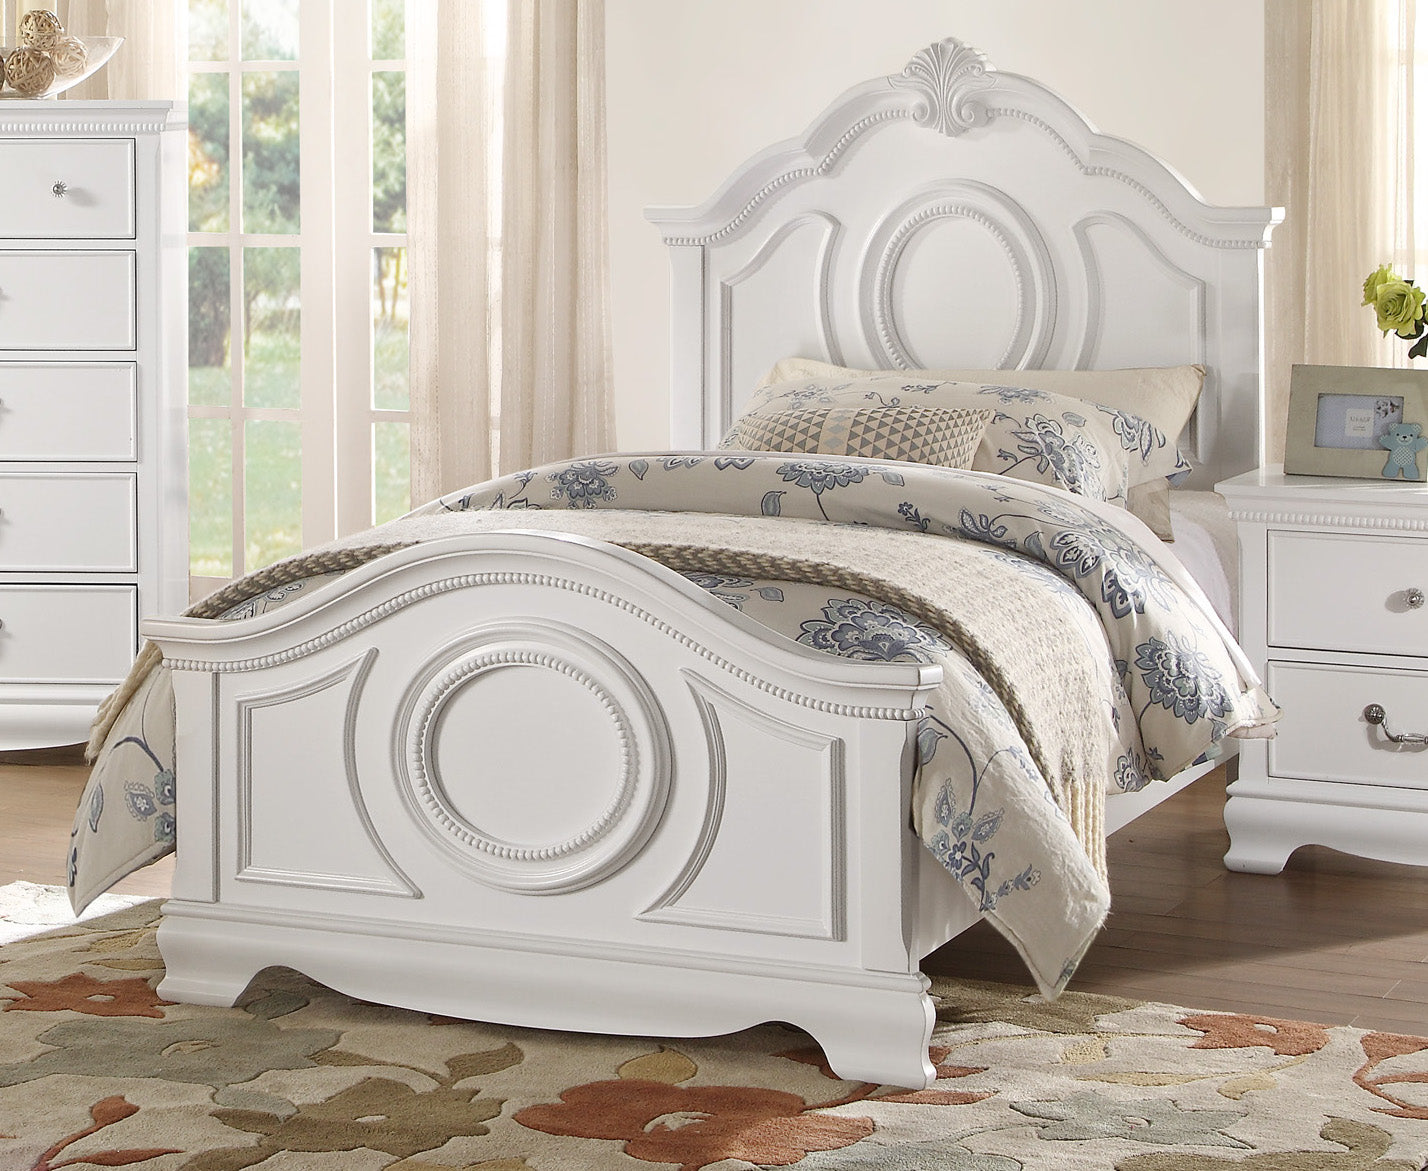 Labrant Girls Cottage Twin Bed in White